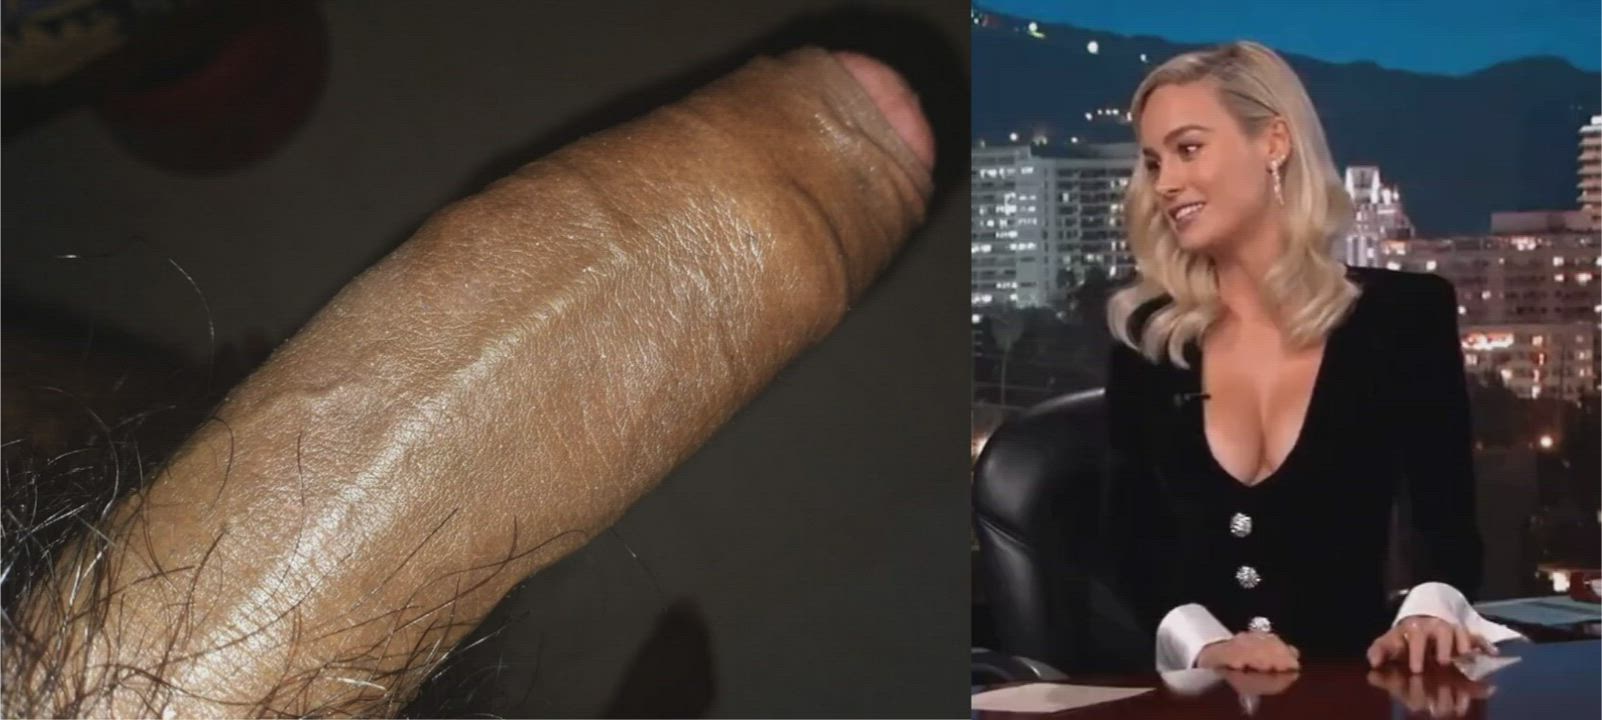 Chilling and gooning my alpha tamil cock. Join me on discord? [Read my comment]